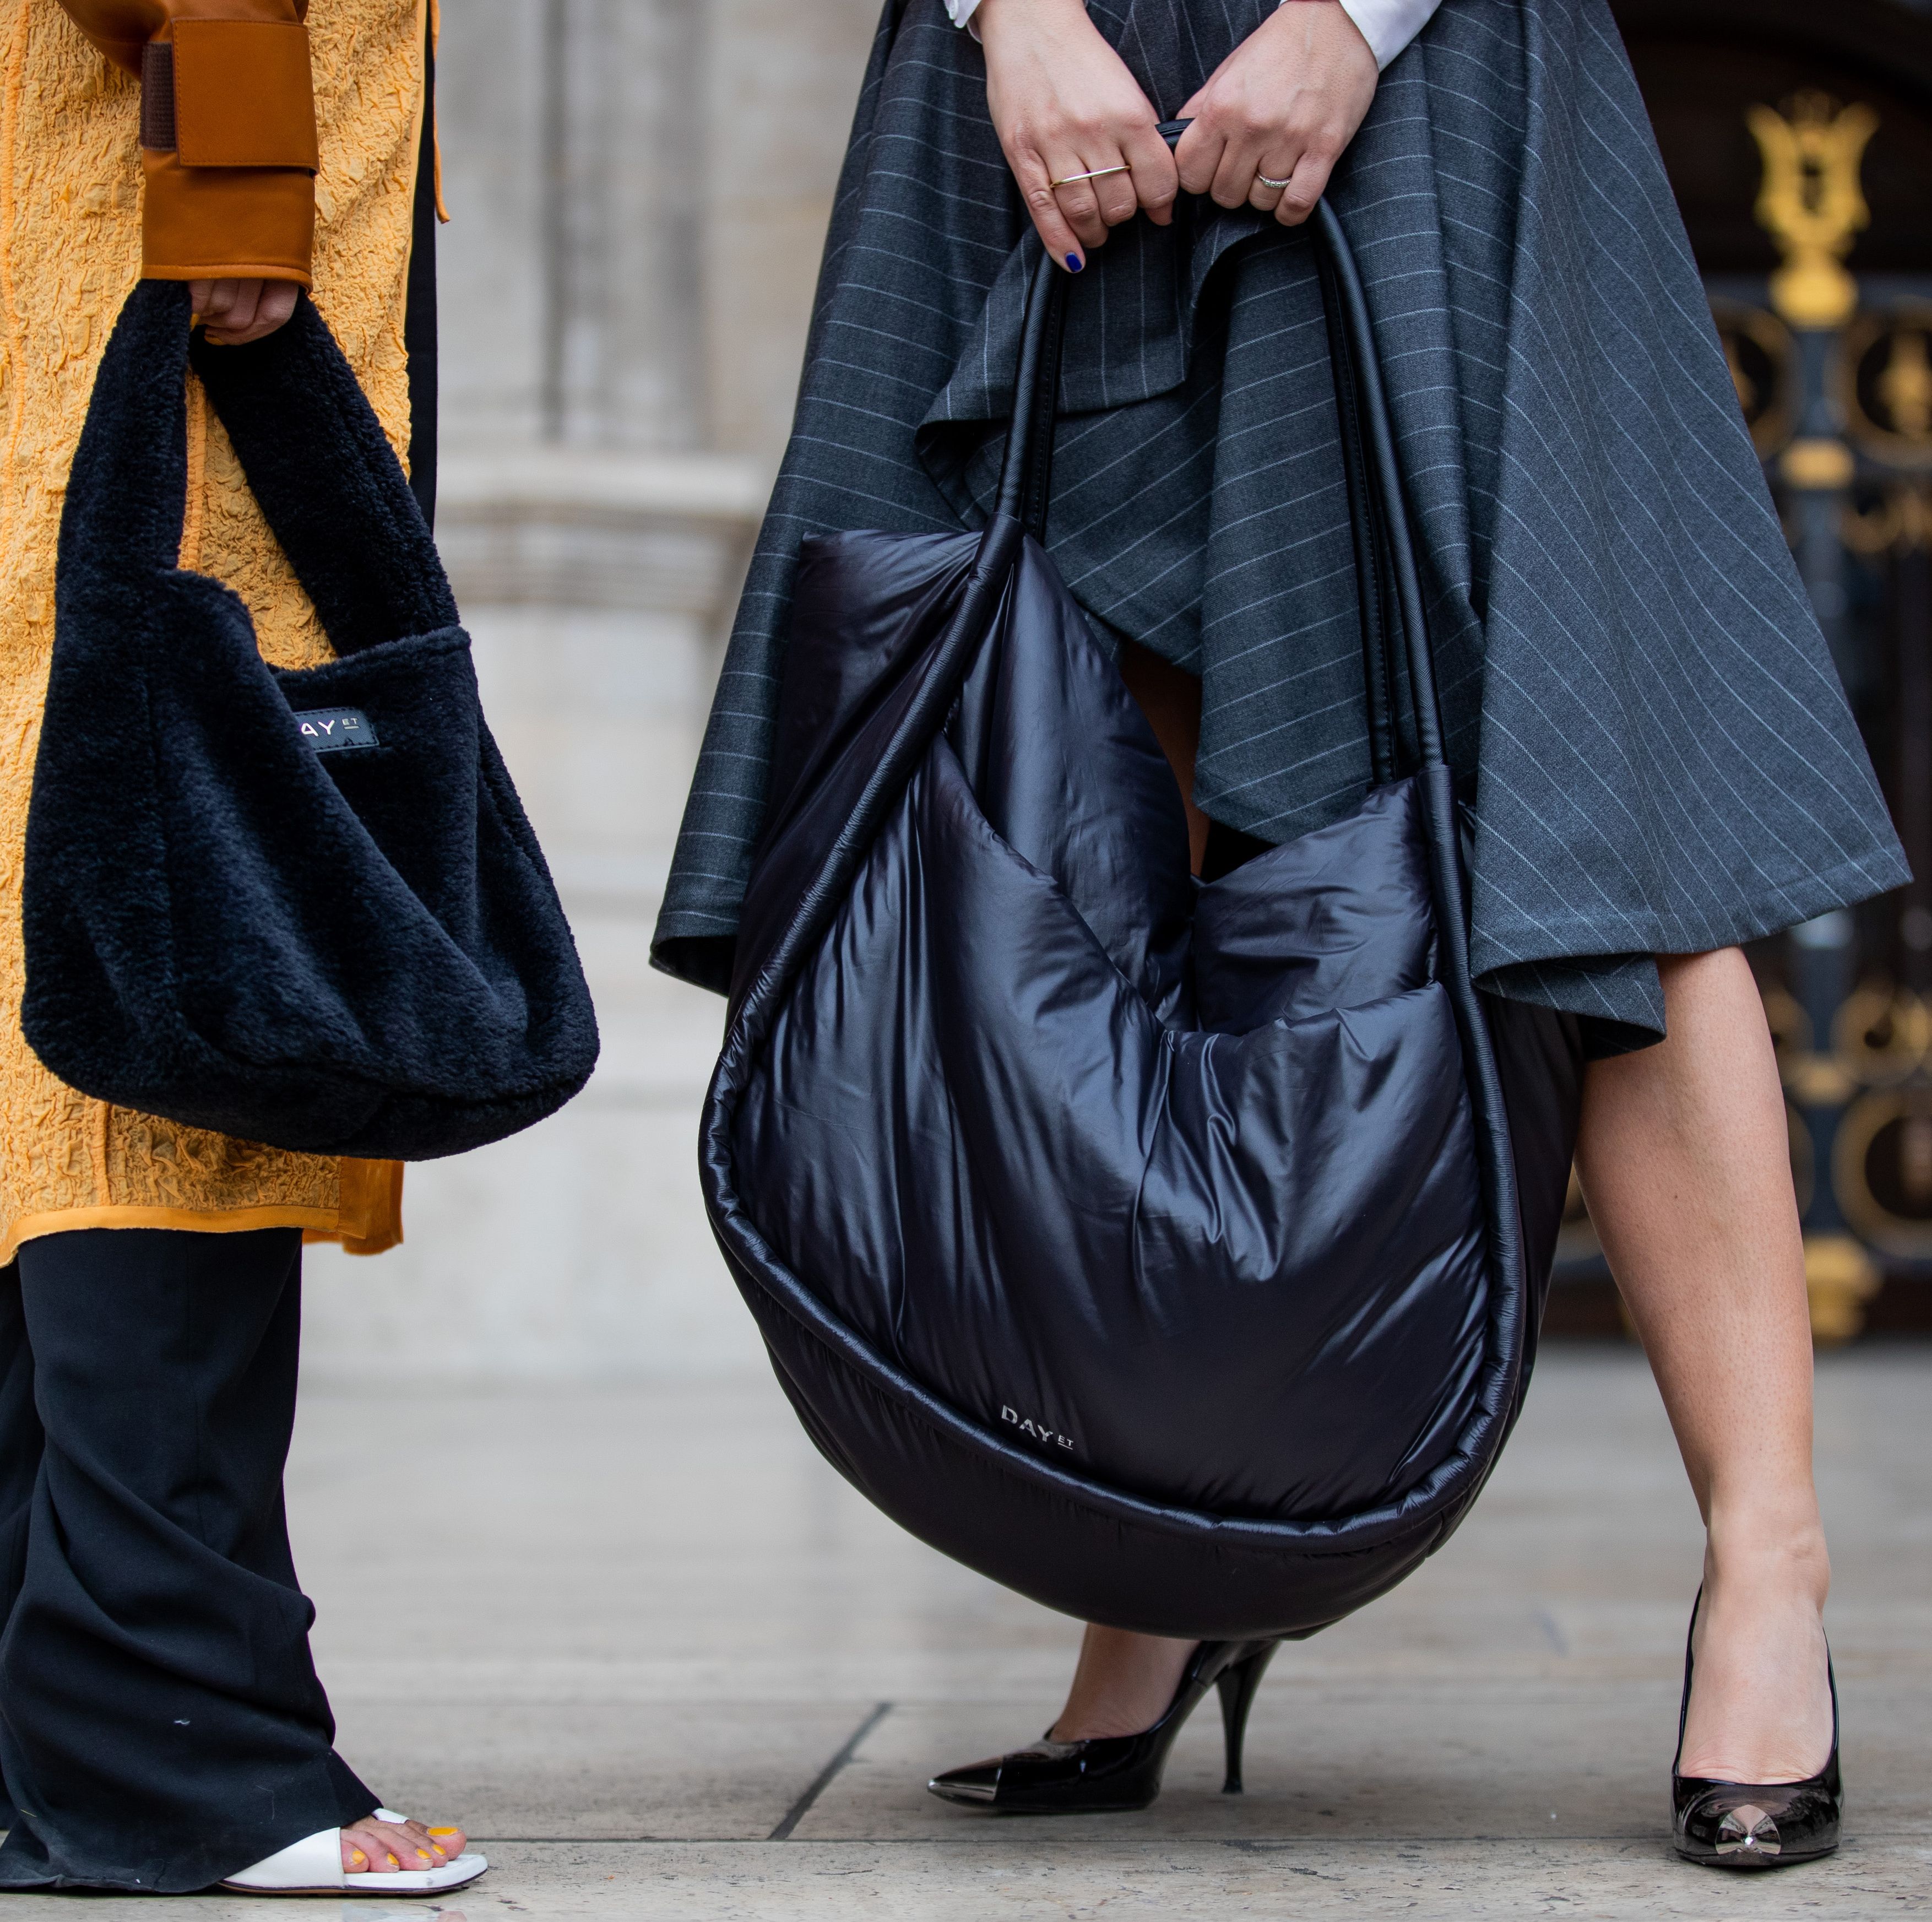 22 Oversized Tote Bags to Carry All Your Things Through This Season